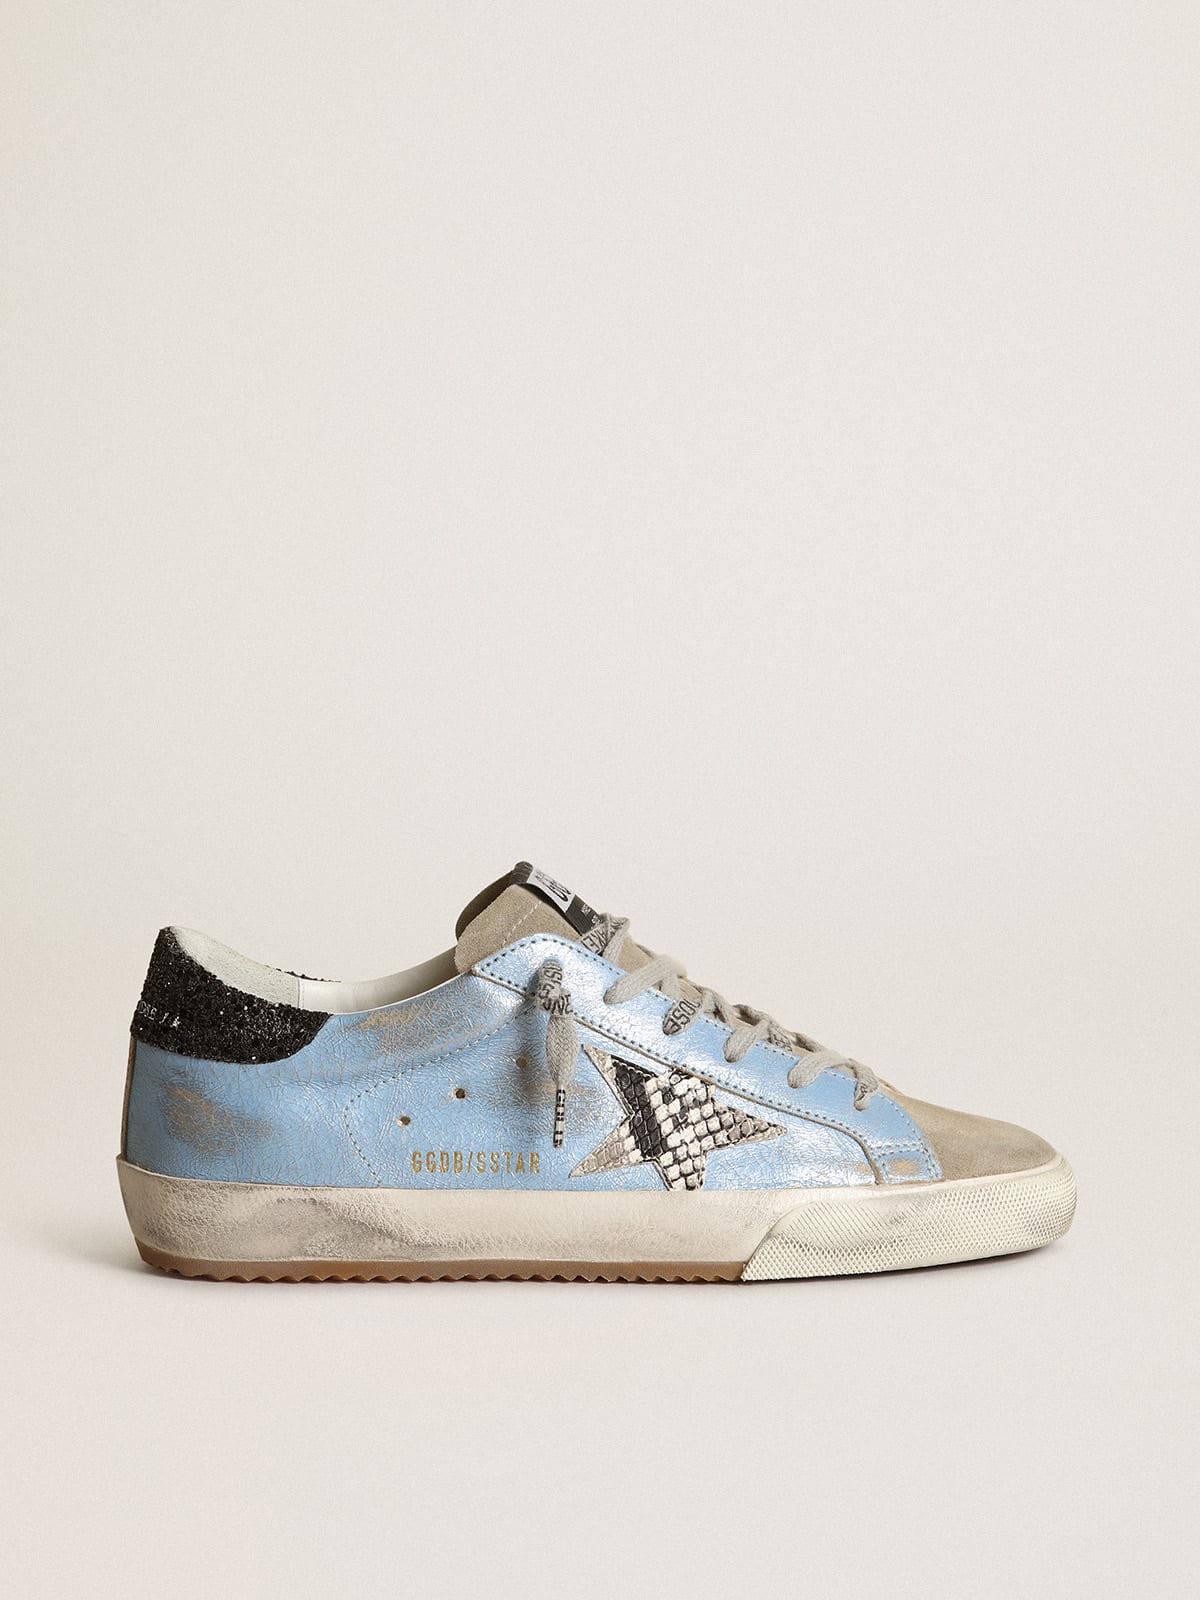 Golden Goose - Light blue Super-Star with a gray star and glitter heel tab in 